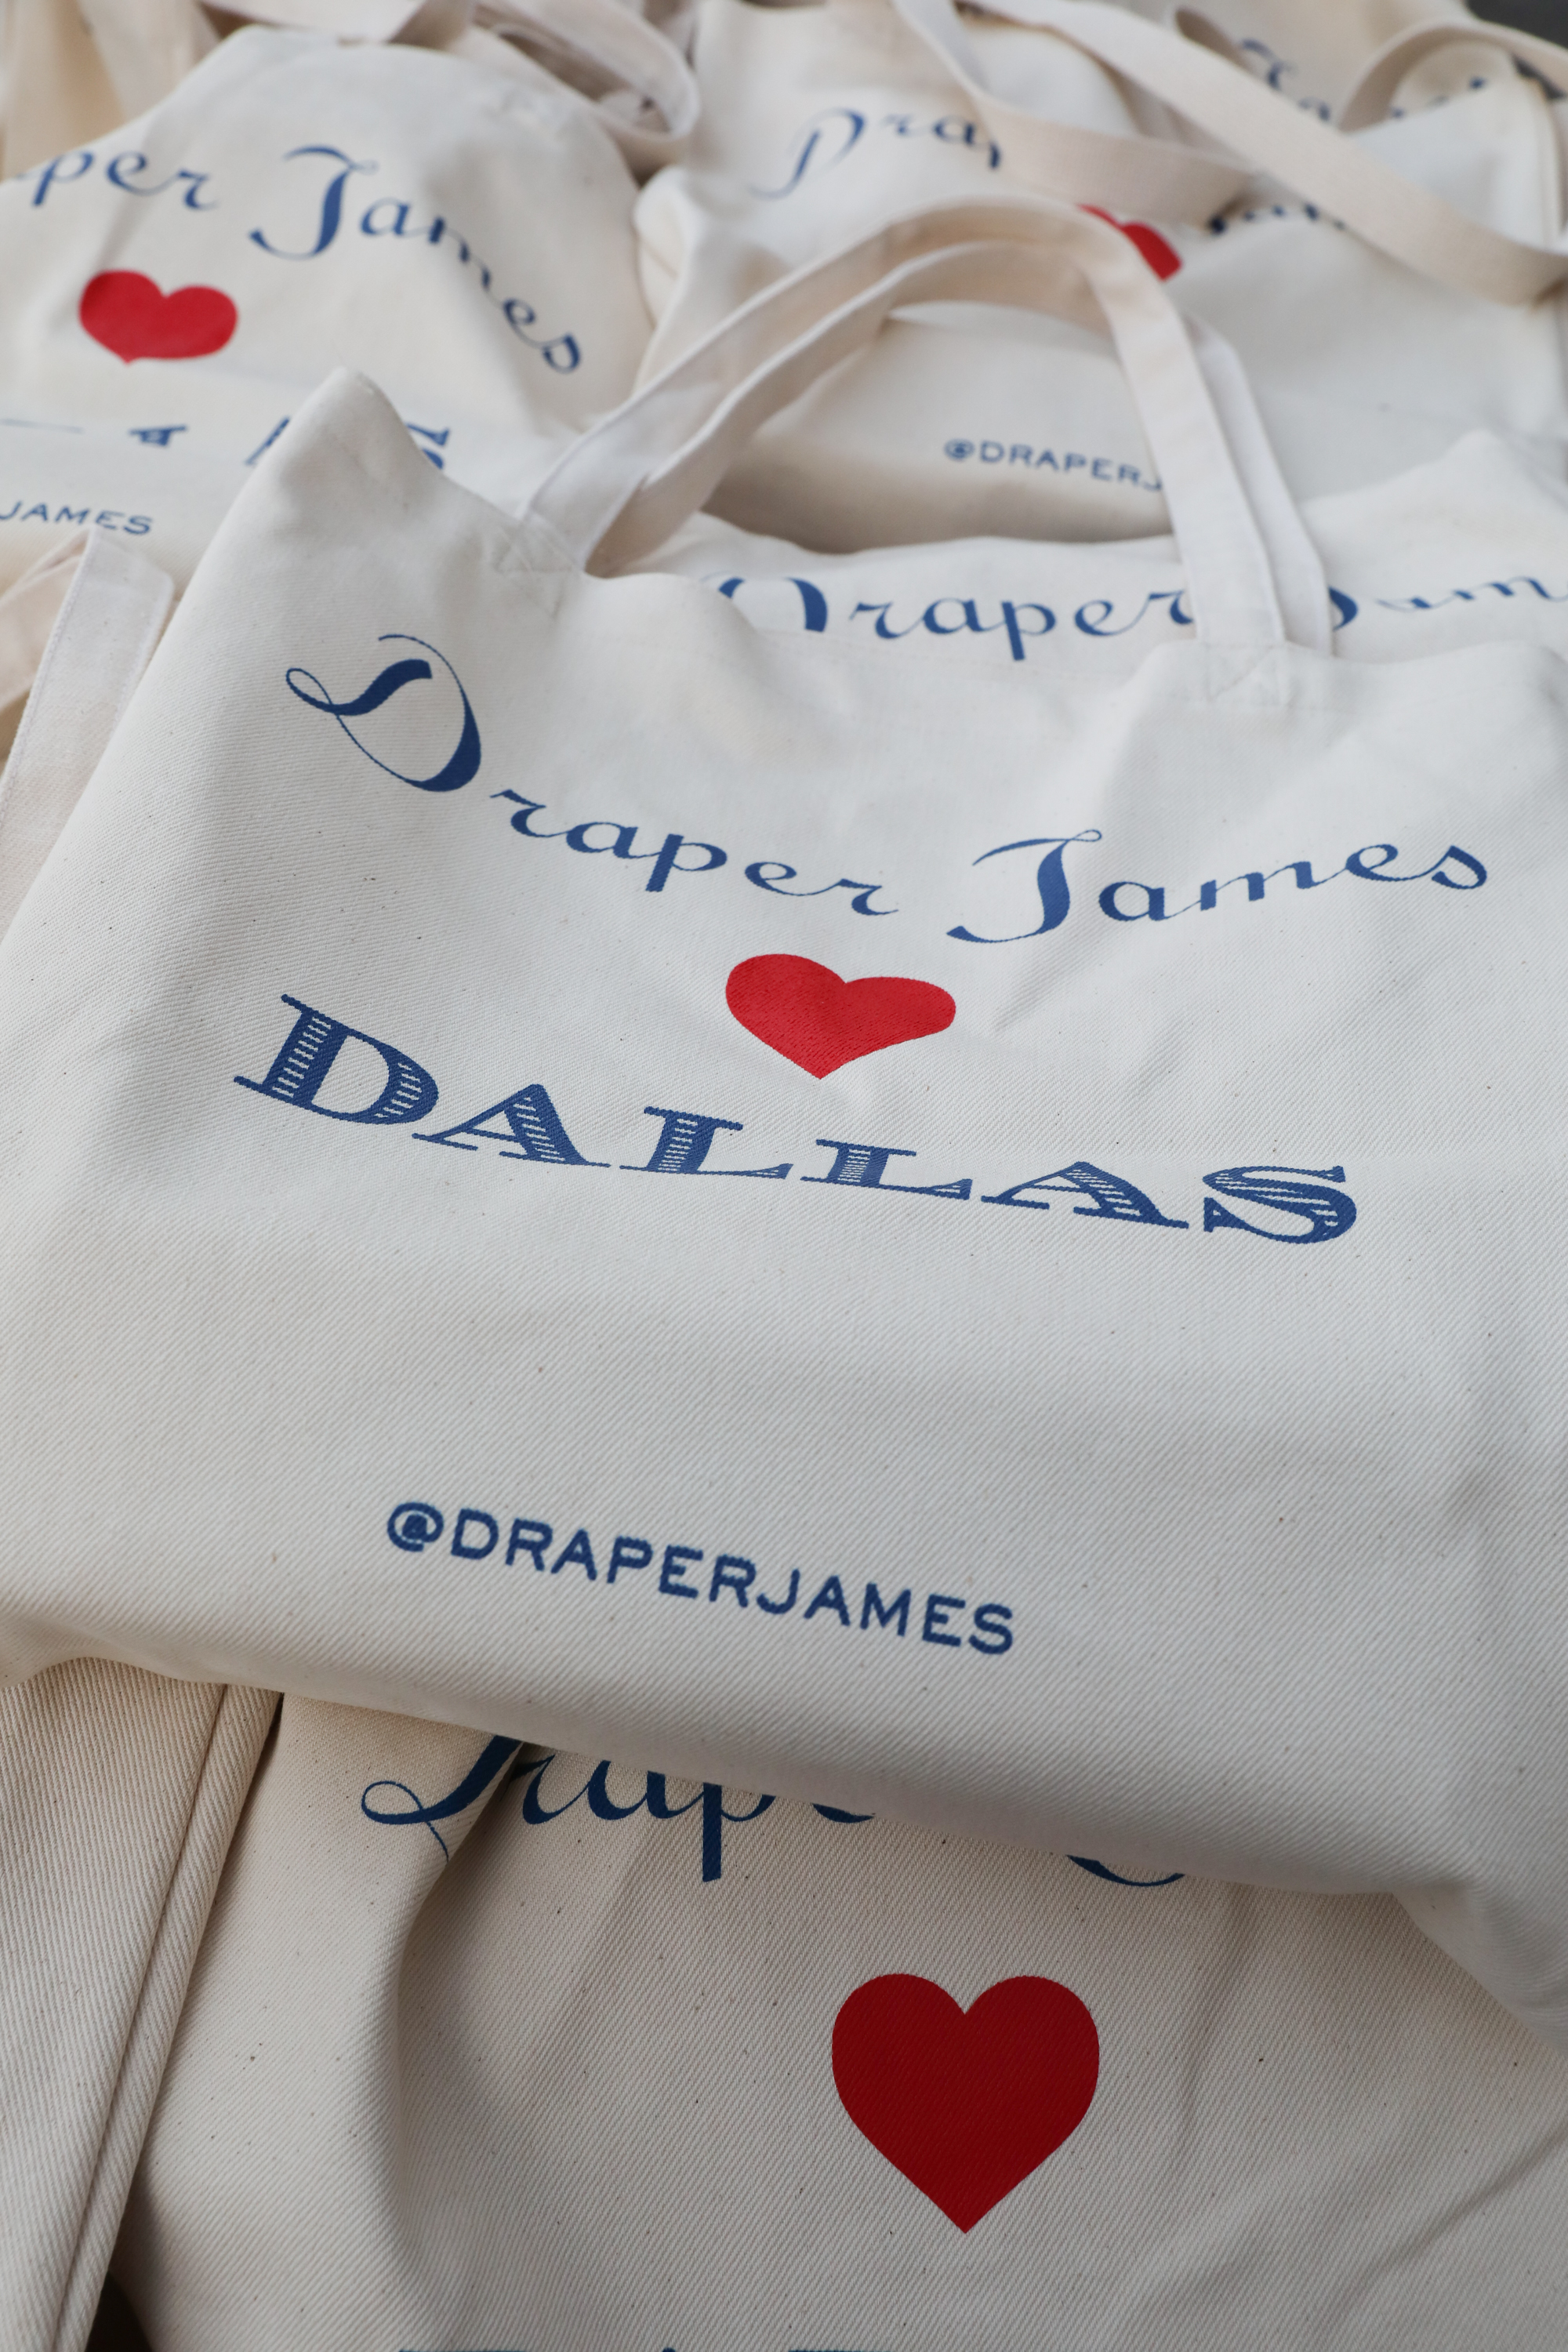 Guests were gifted with a specialty Draper James tote filled with goodies. 